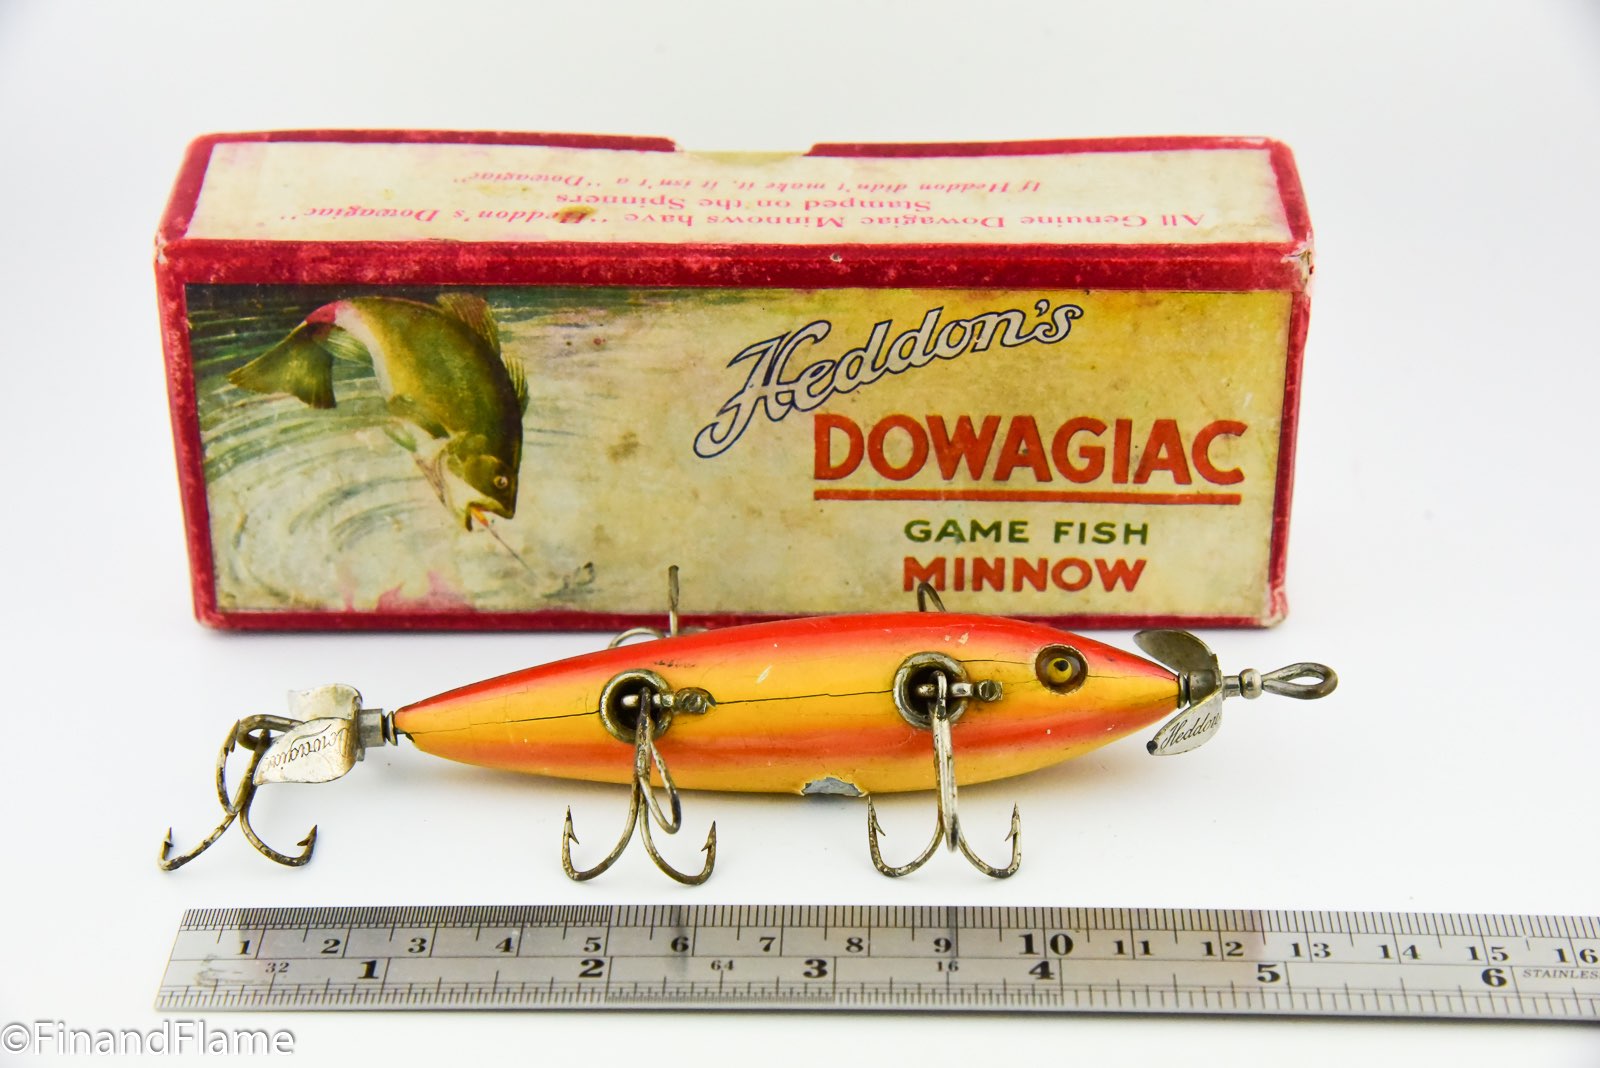 Heddon 151 Underwater Minnow Lure in Down Box | The Angling